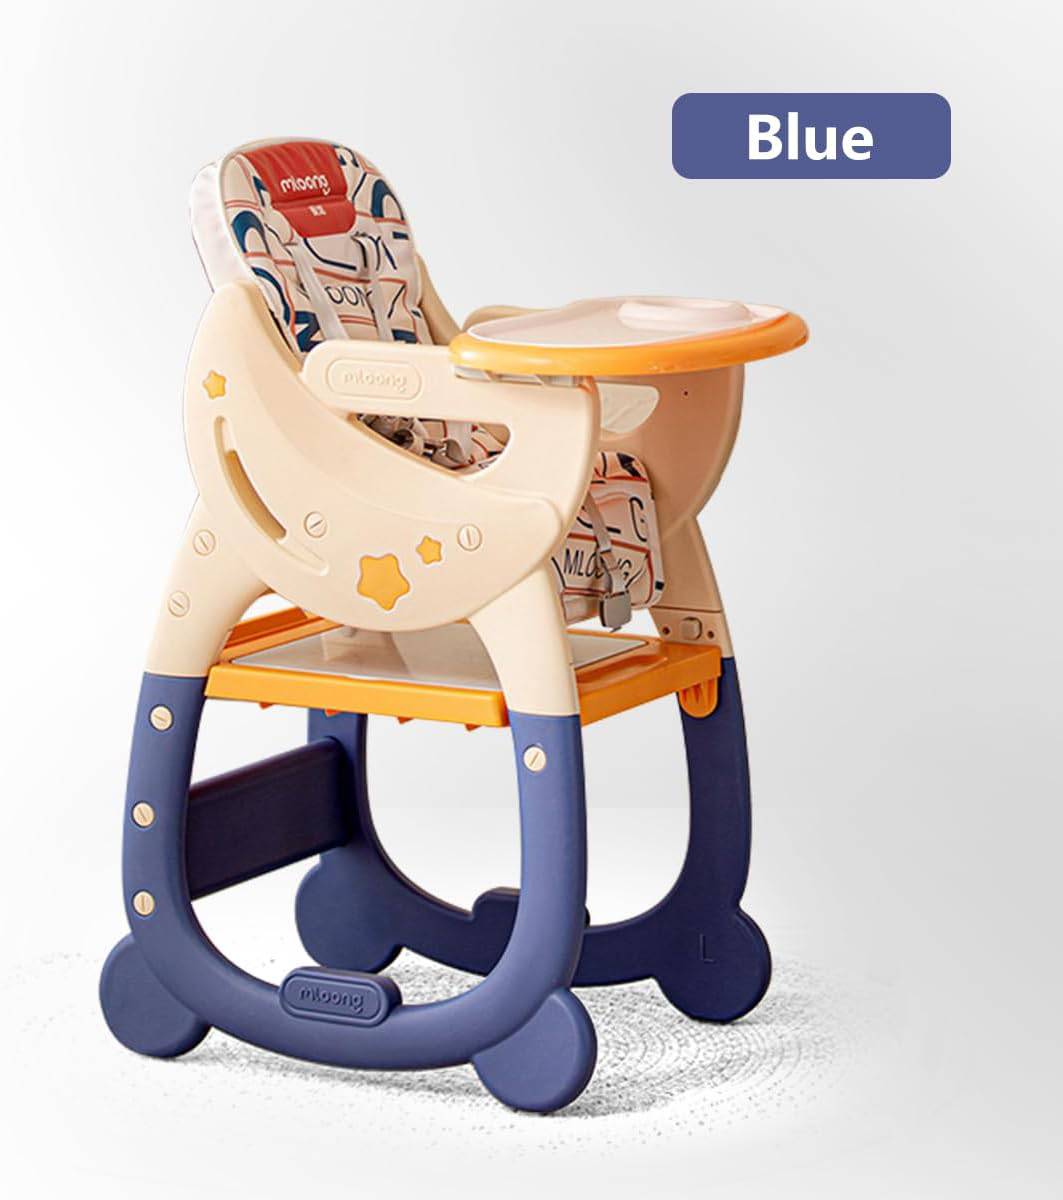 COOLBABY YLY074 3-in-1 Baby High Chair, Booster Seat, Desk and Chair Set，Blue - COOL BABY